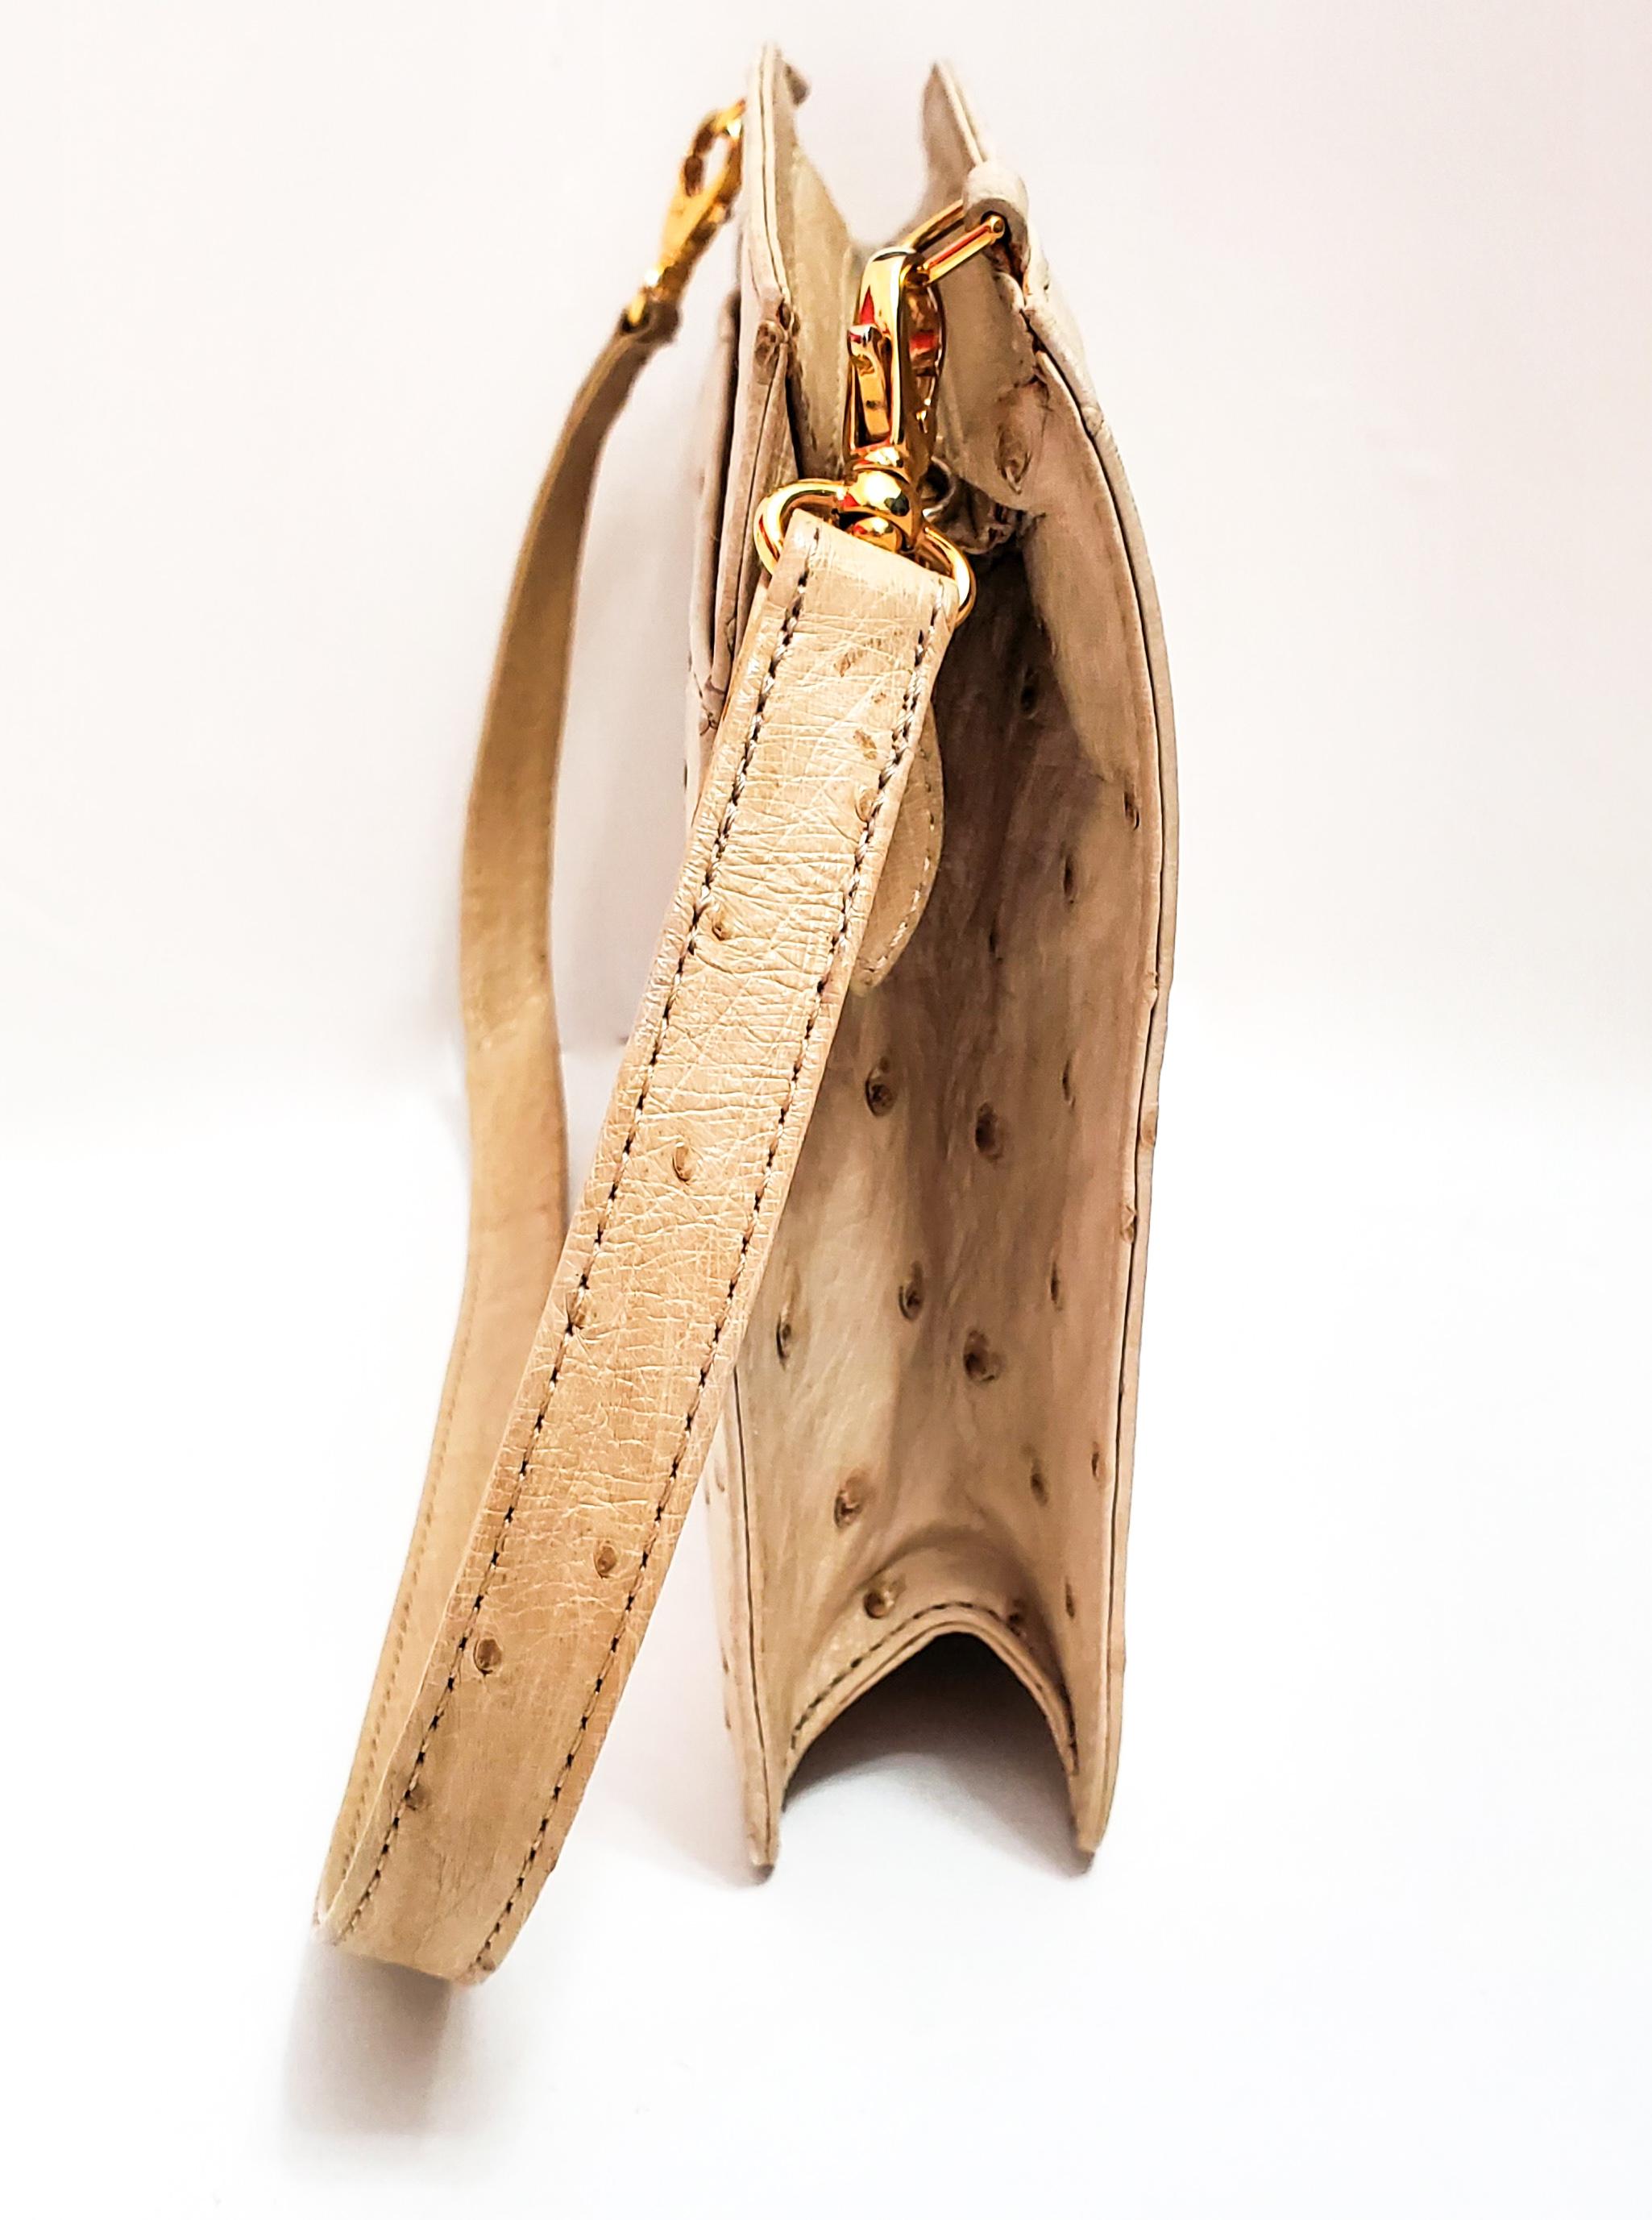 Lana Marks is known world wide for fabulous handbags!  This stunning ostrich bag in cream can be carried as a clutch or use removable shoulder strap for a different look!
Outside snap closure, a side zip pocket with gold tone hardware.  Not limited